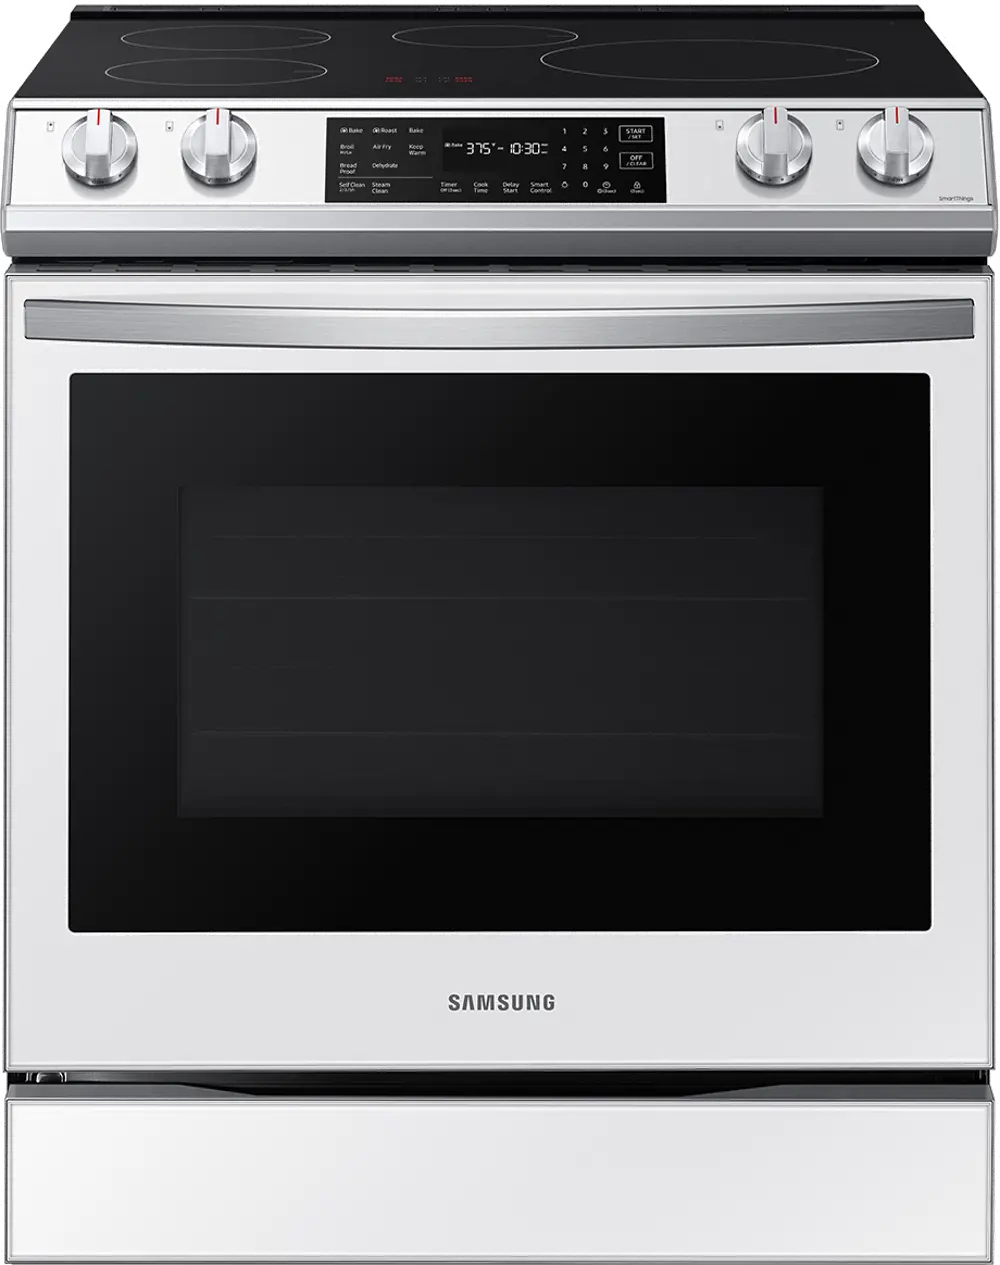 Samsung 6.3 Cu Ft Single Oven Smart Induction Range with Air Fry - White Glass-1